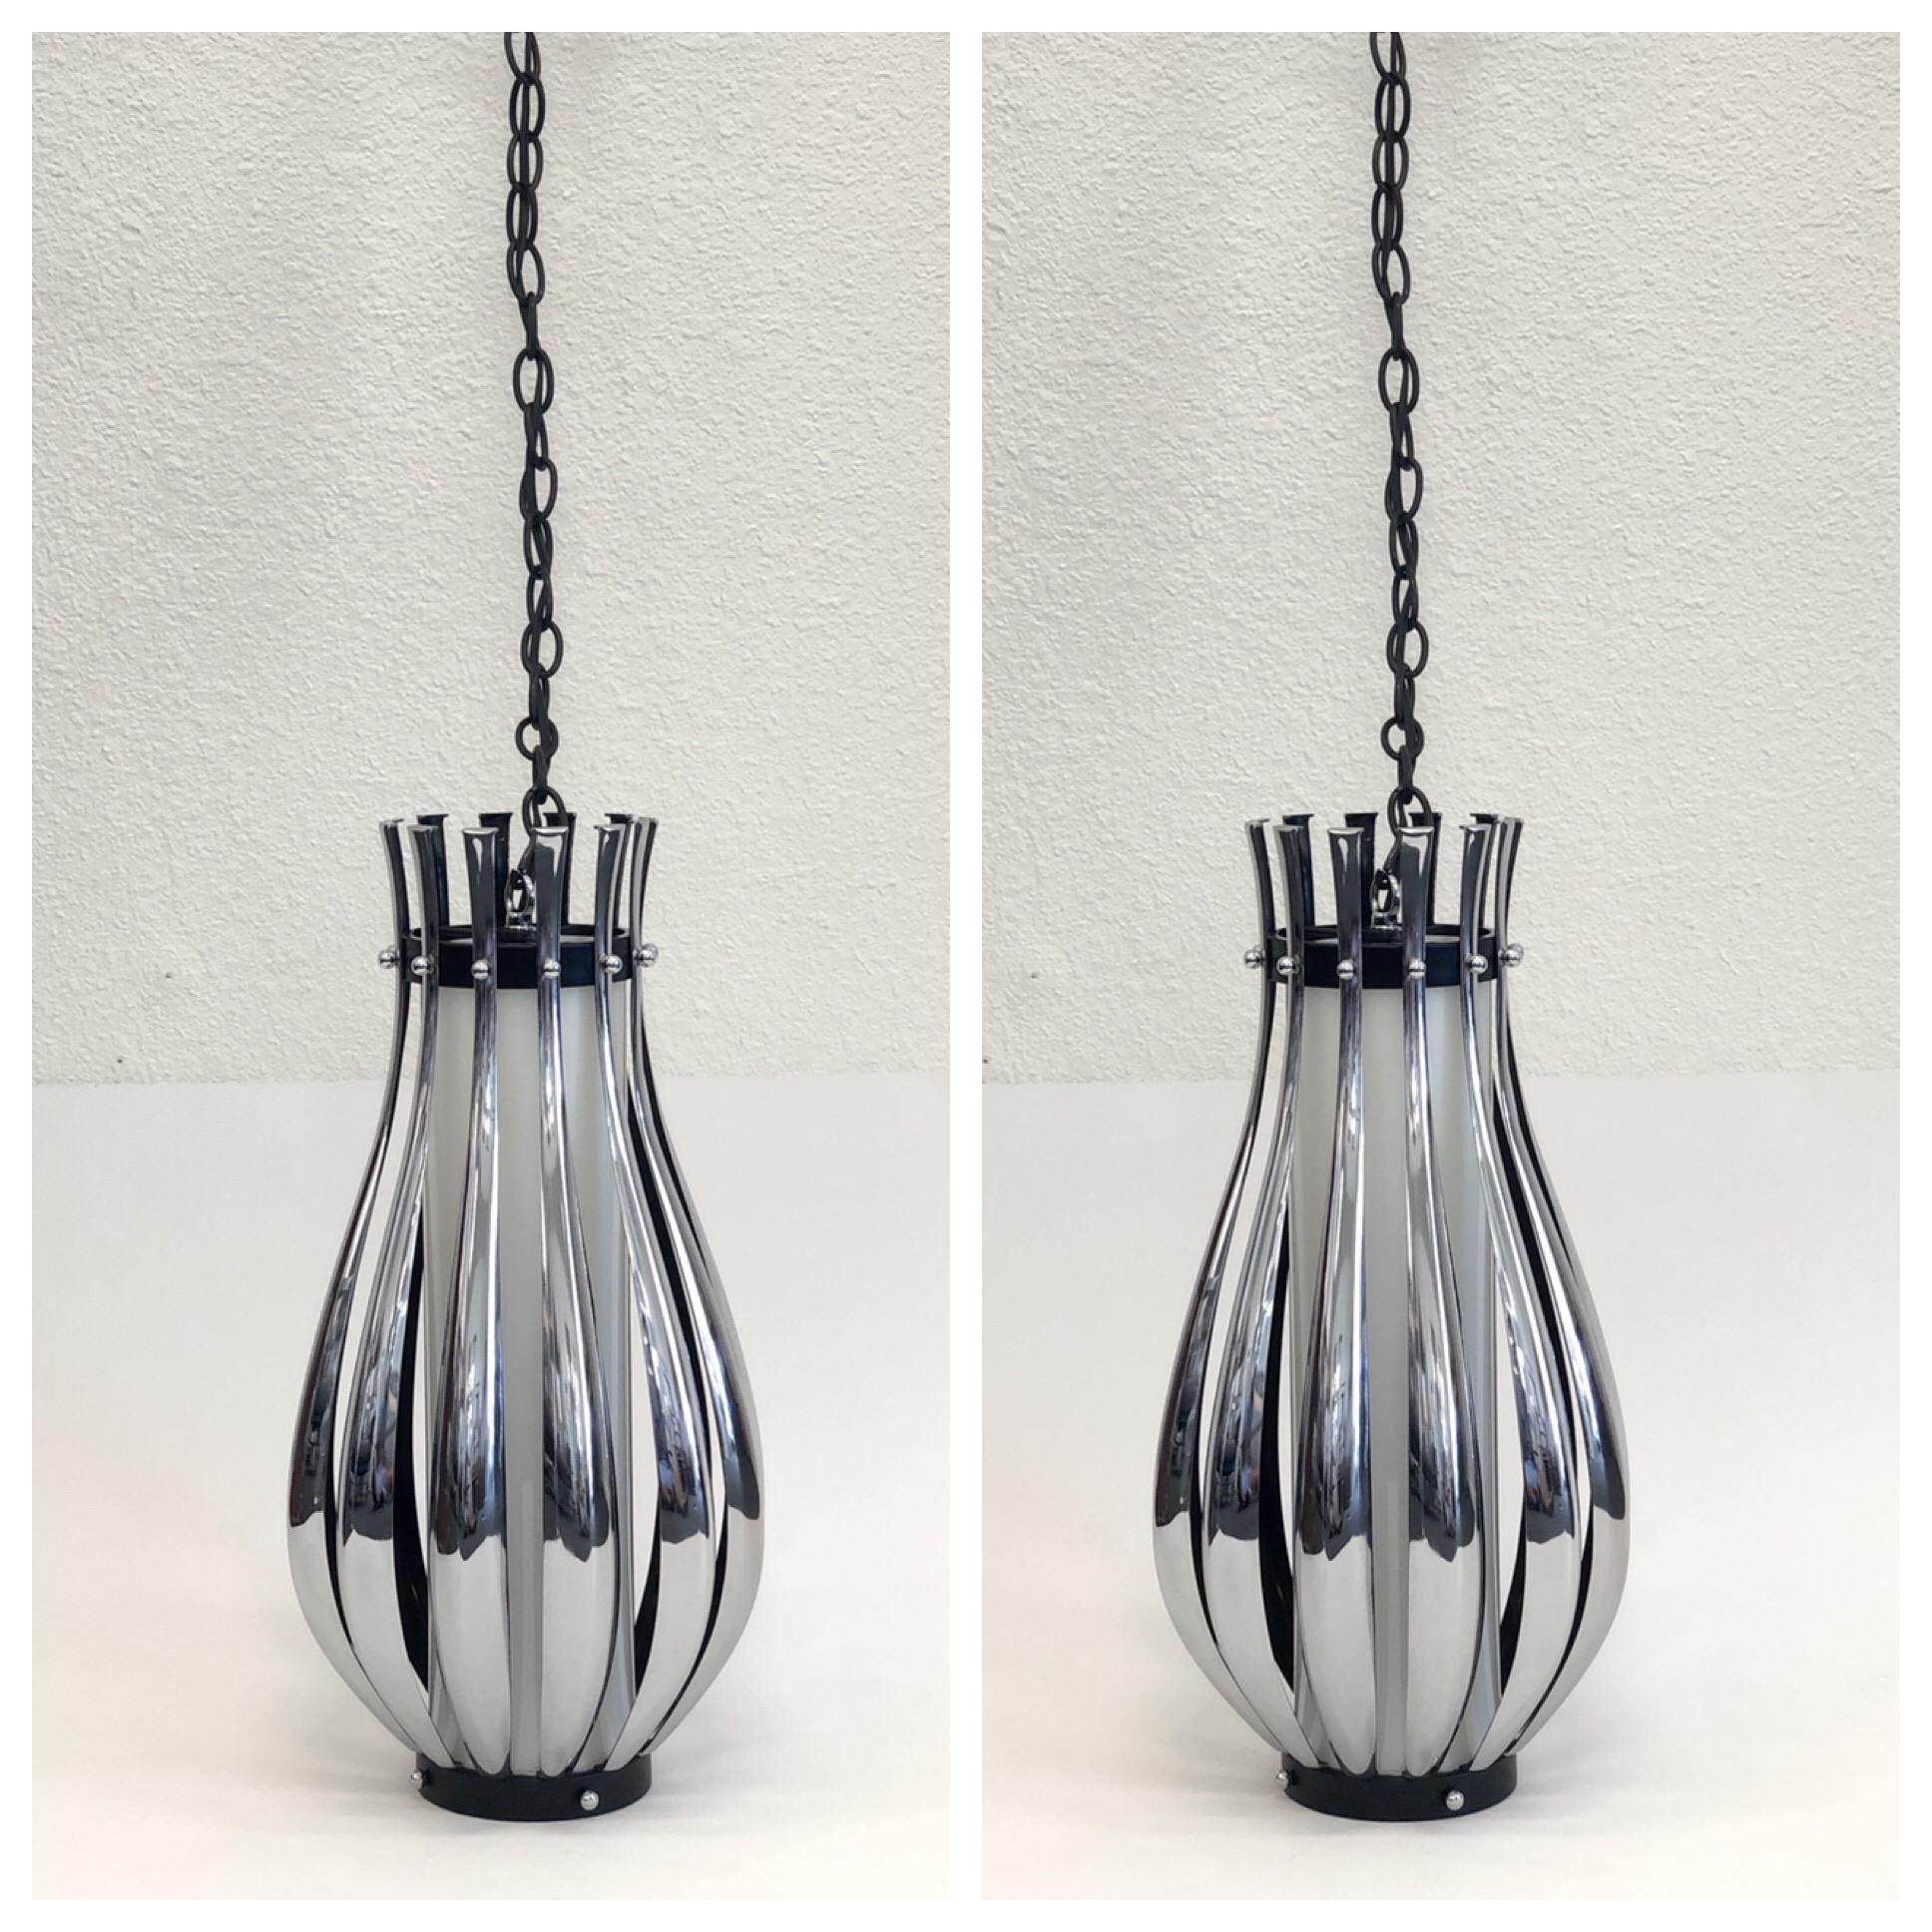 A glamorous pair of 1970s polish chrome and white glass pendant lamps by Sonneman. The lamps are chrome on the outside and black lacquer in the inside. A white glass cylinder covers the light bulb. The lamps can be used as hanging pendant lamps or